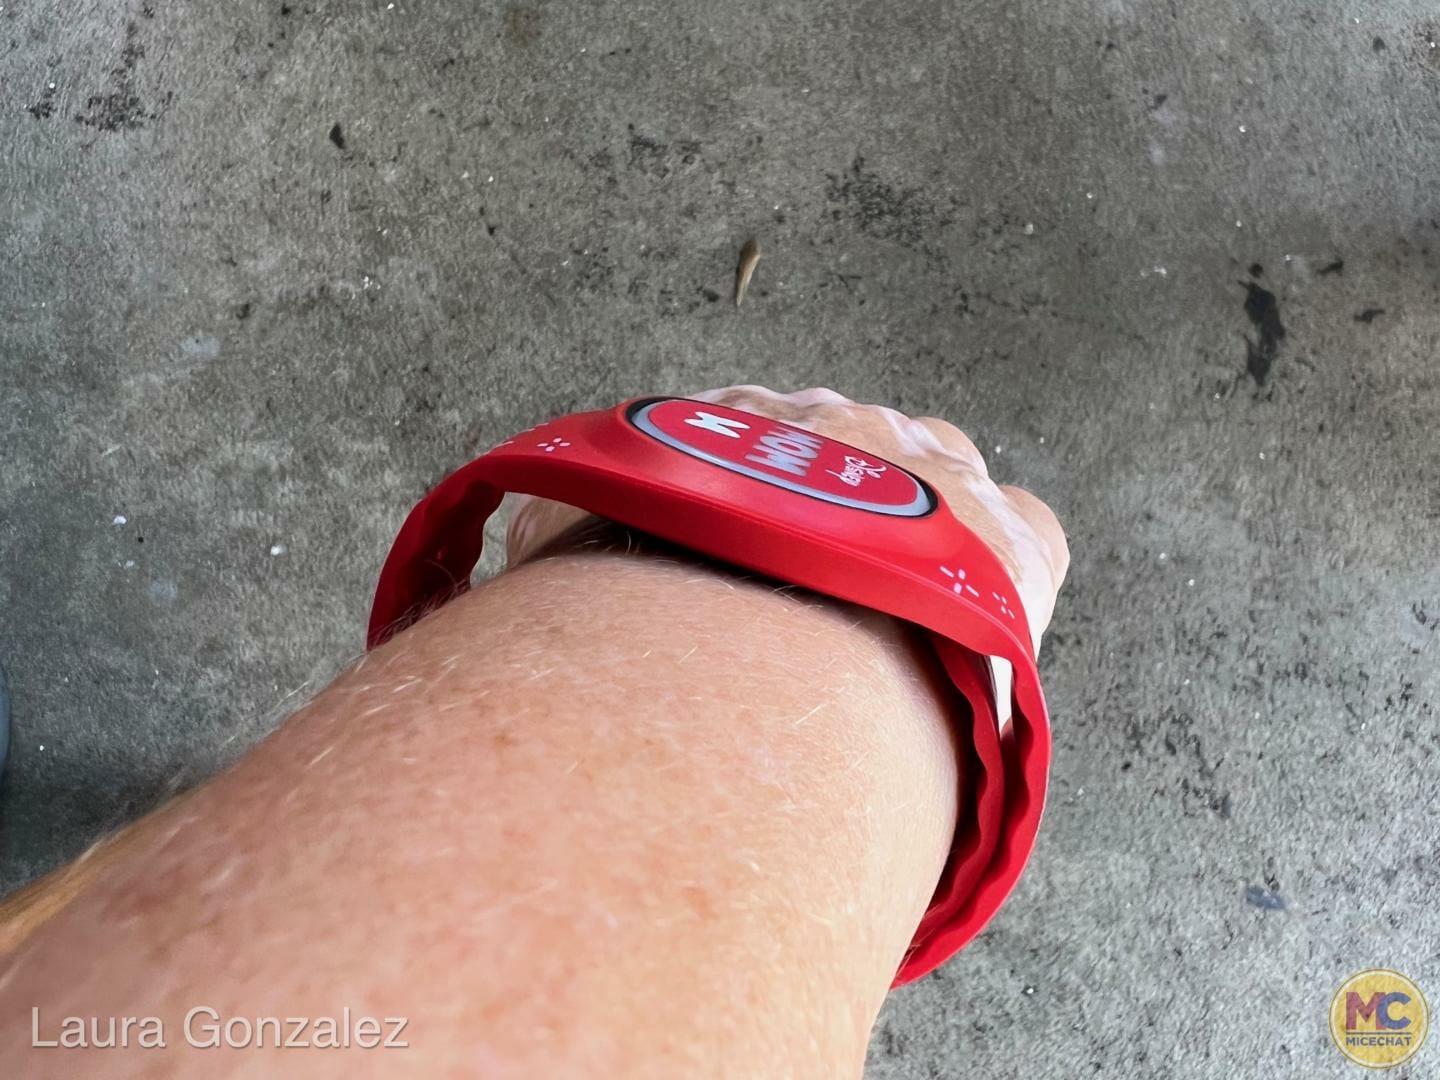 MagicBand+, Necessity or Nuisance: MagicBand+ Lights Up at Walt Disney World